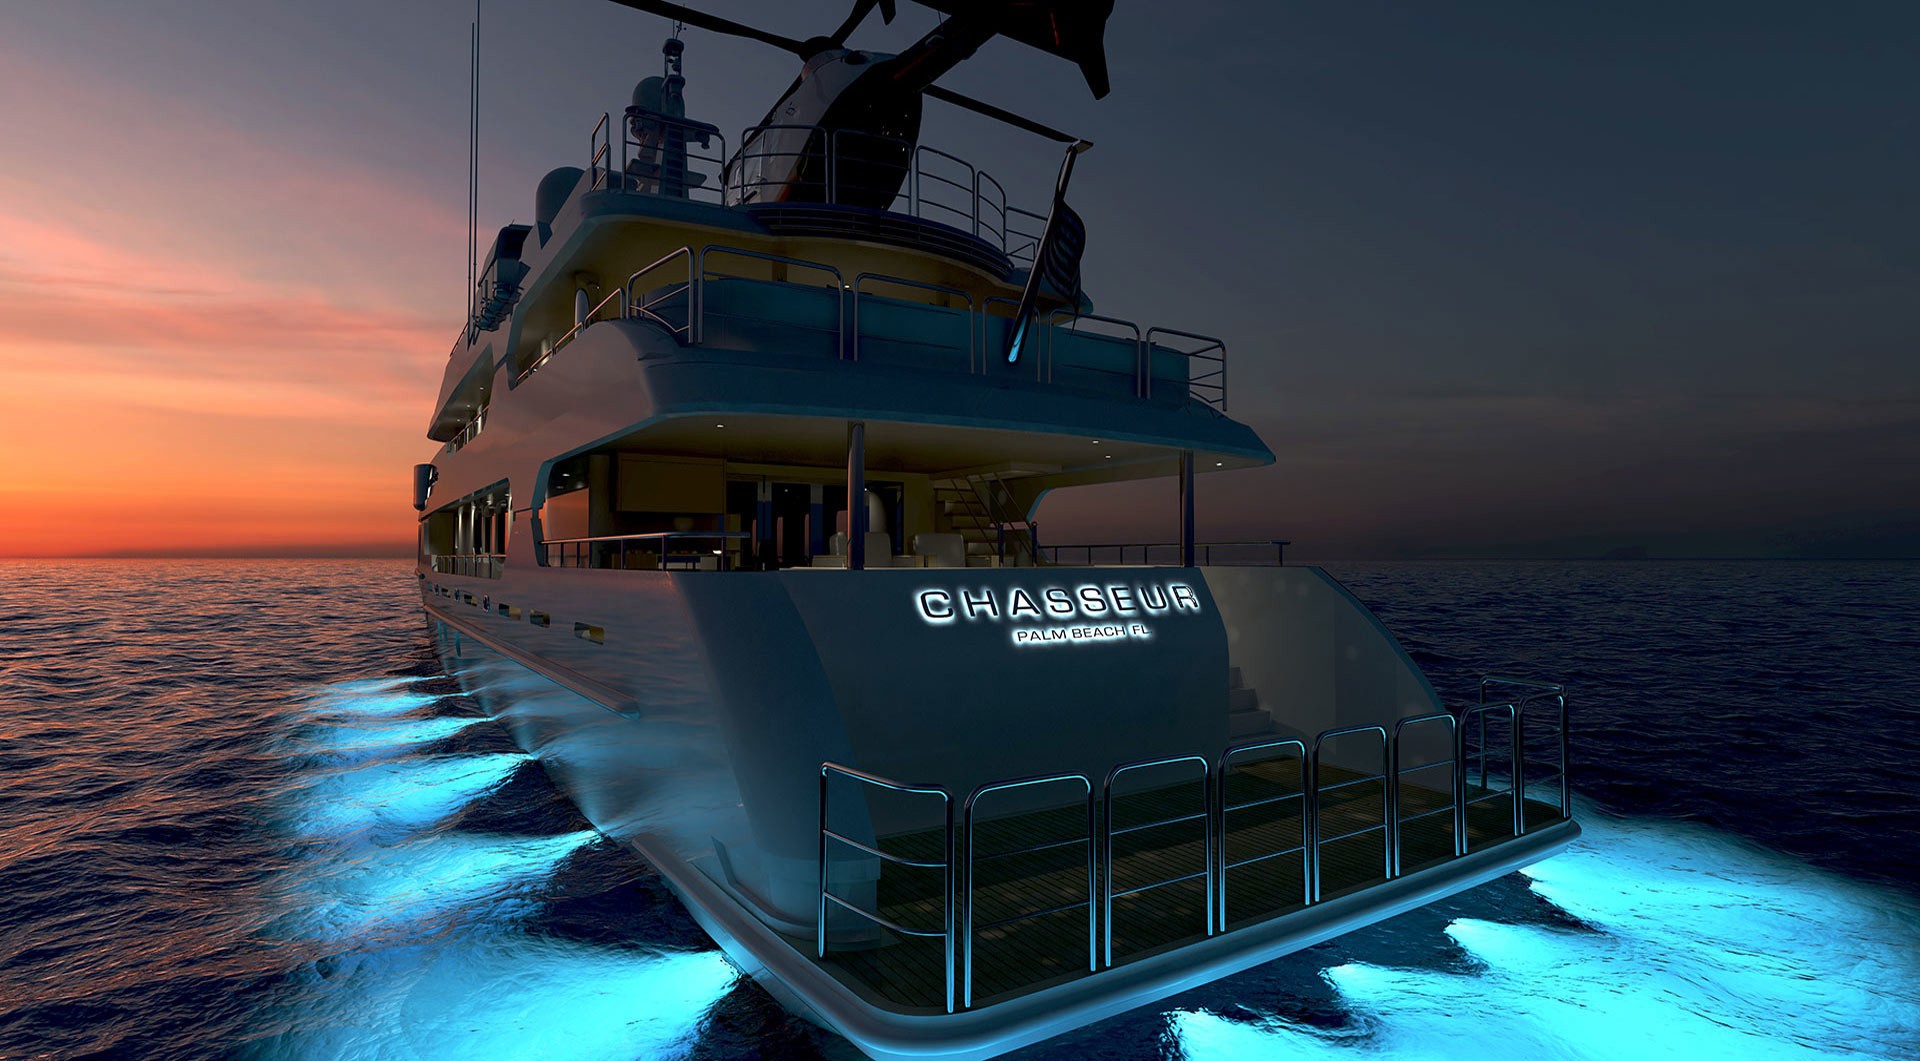 Artist Rendering On Yacht CHASSEUR